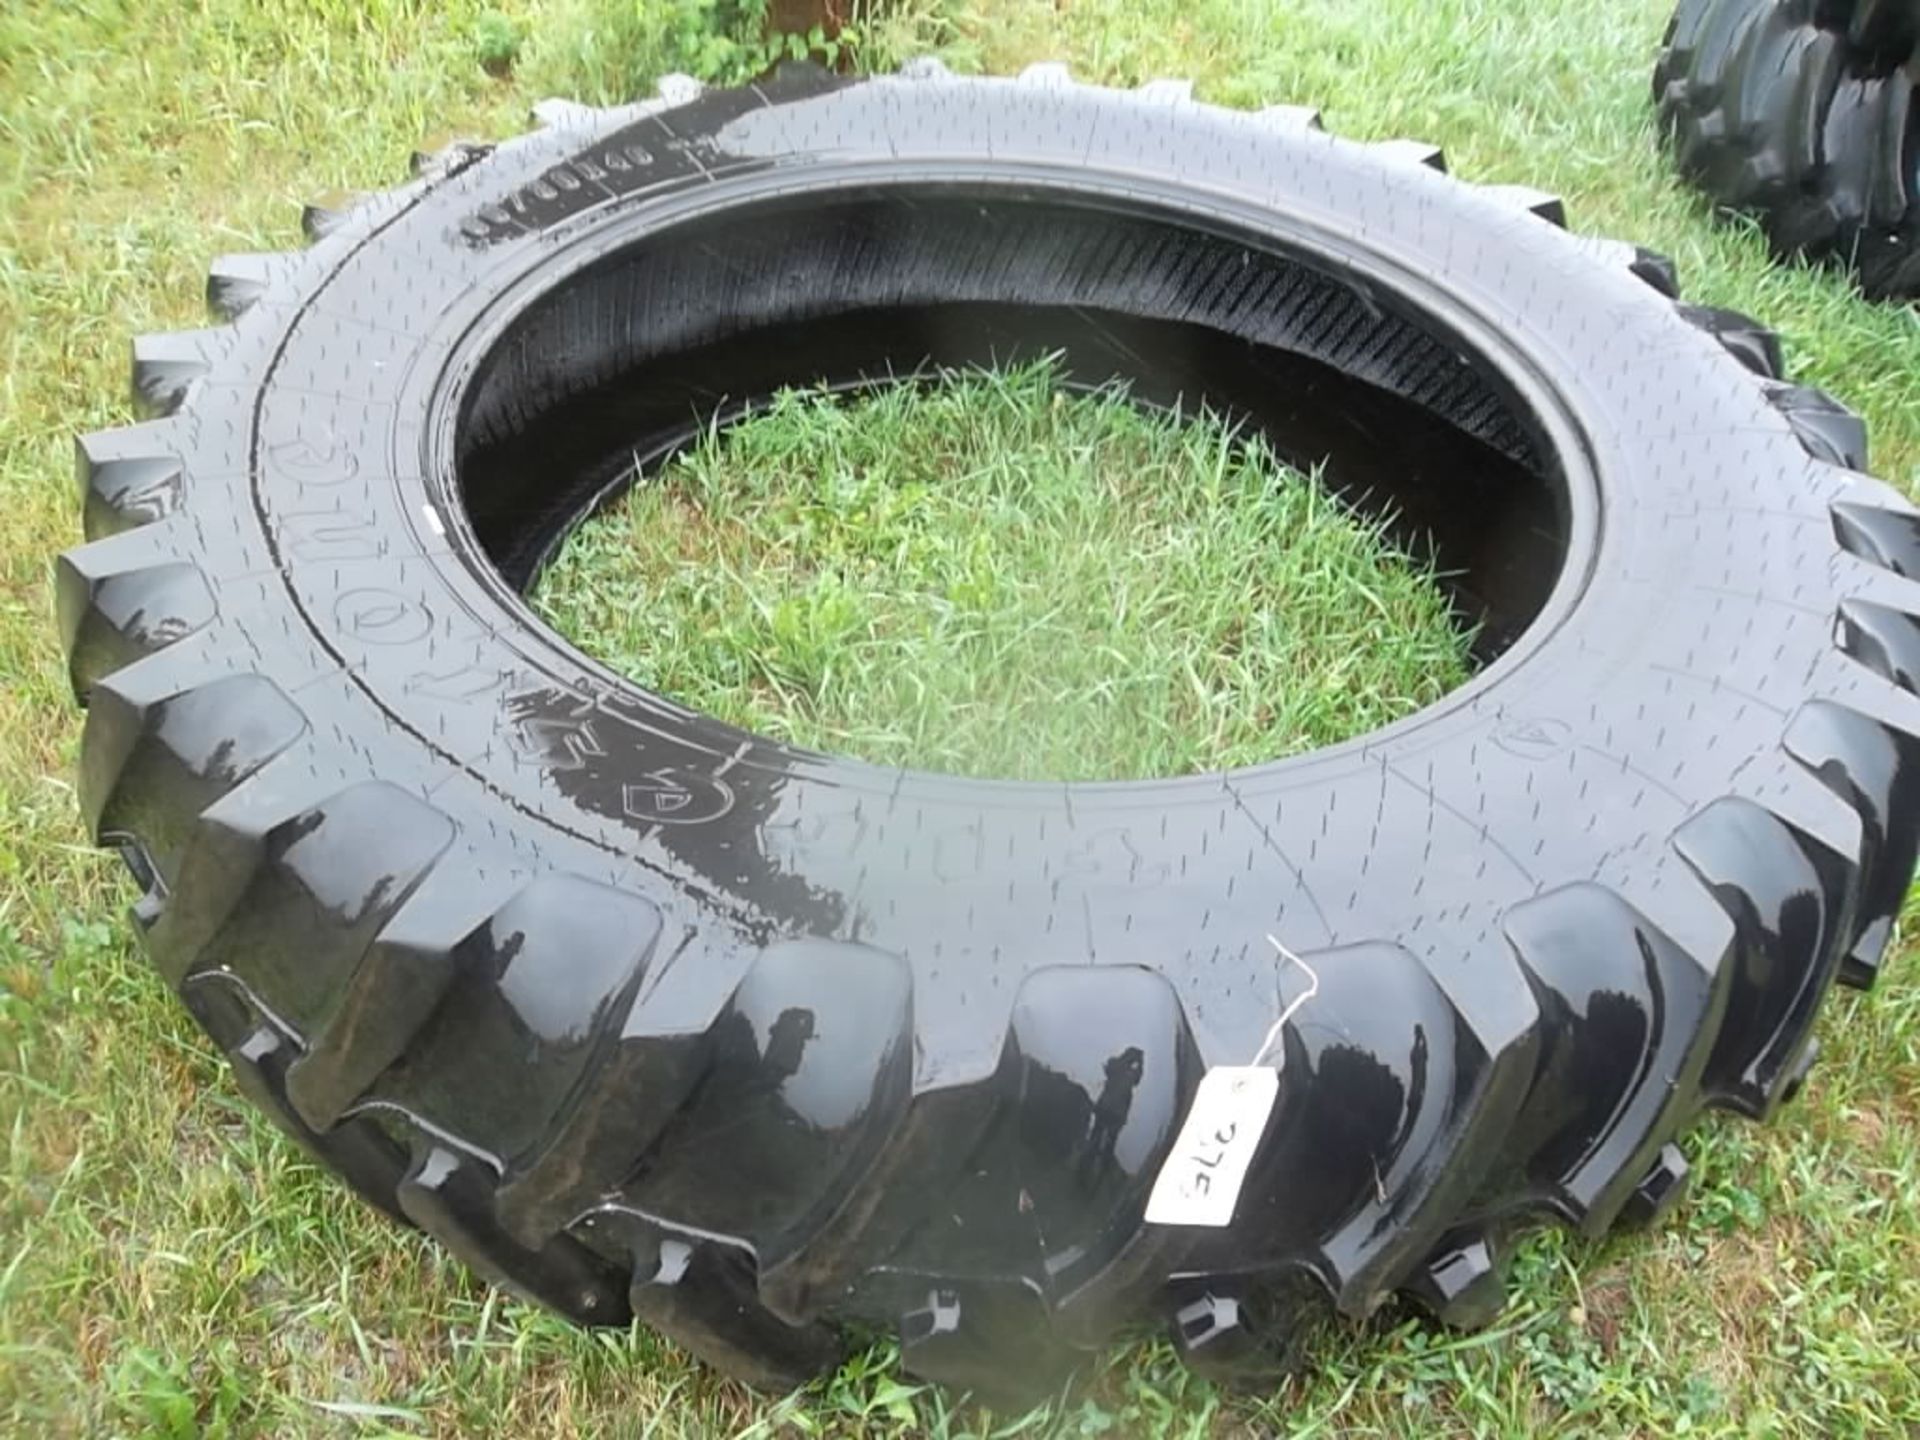 Lot 375 1 FIRESTONE RADIAL ALL TRACTION 23 DEGREE 18.4R46 REAR TRACTOR TIRE( There is a 6% Sales